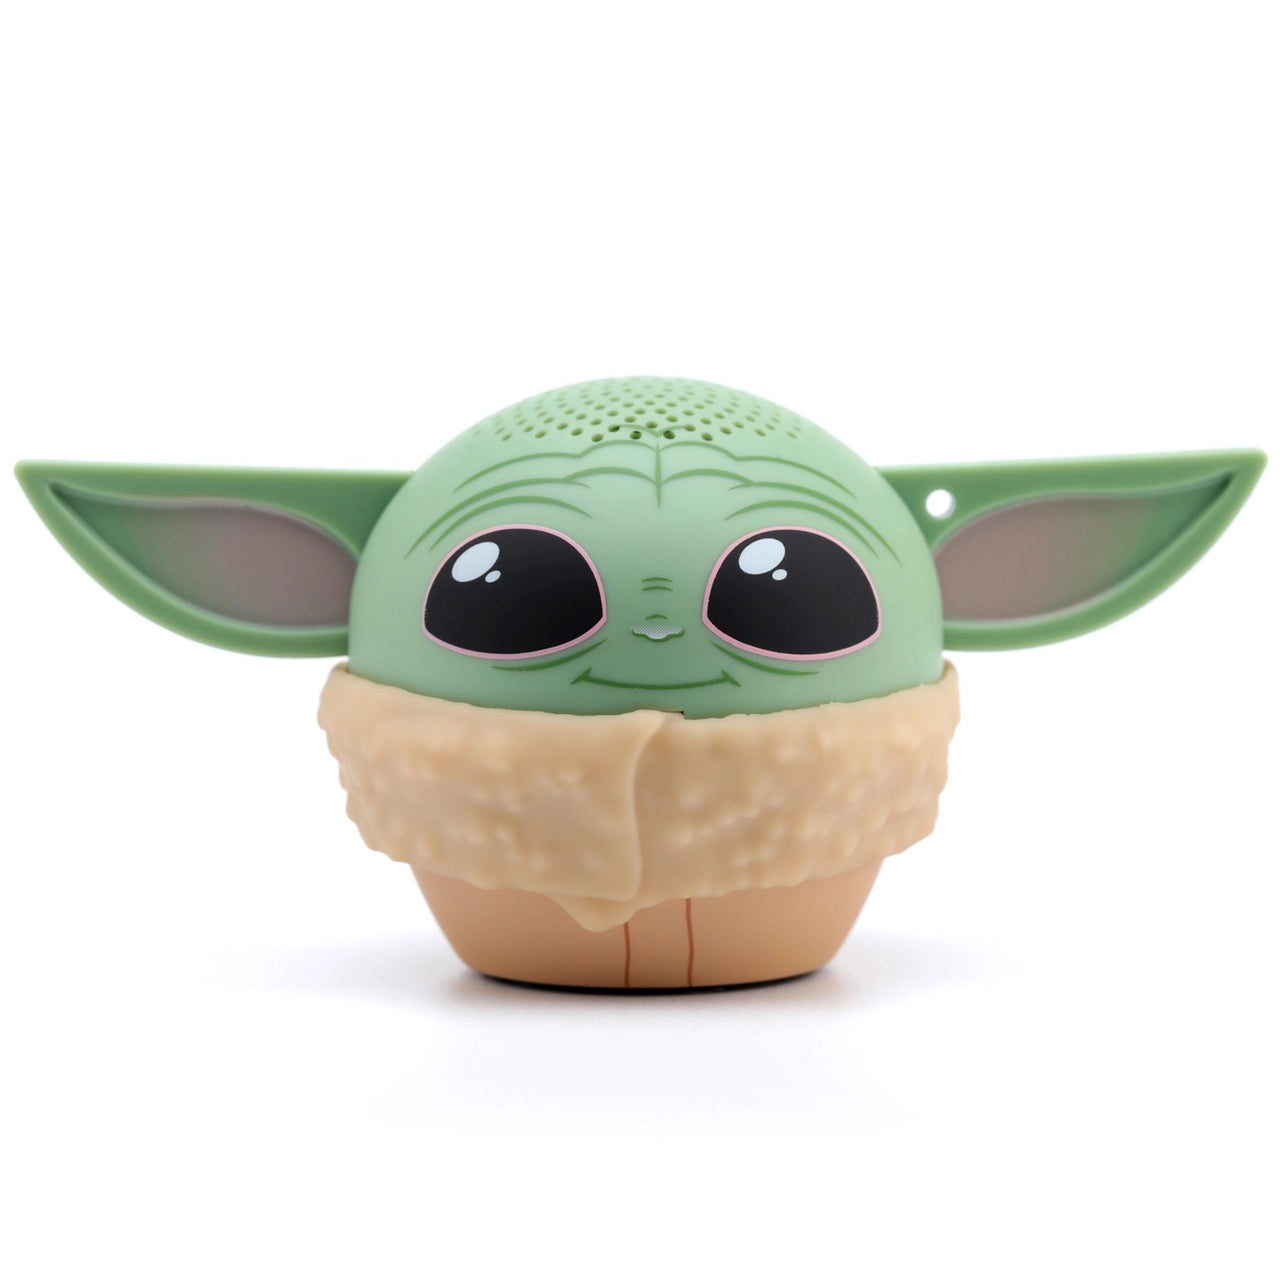 The Child - Bitty Boomers Collectable Bluetooth Speaker